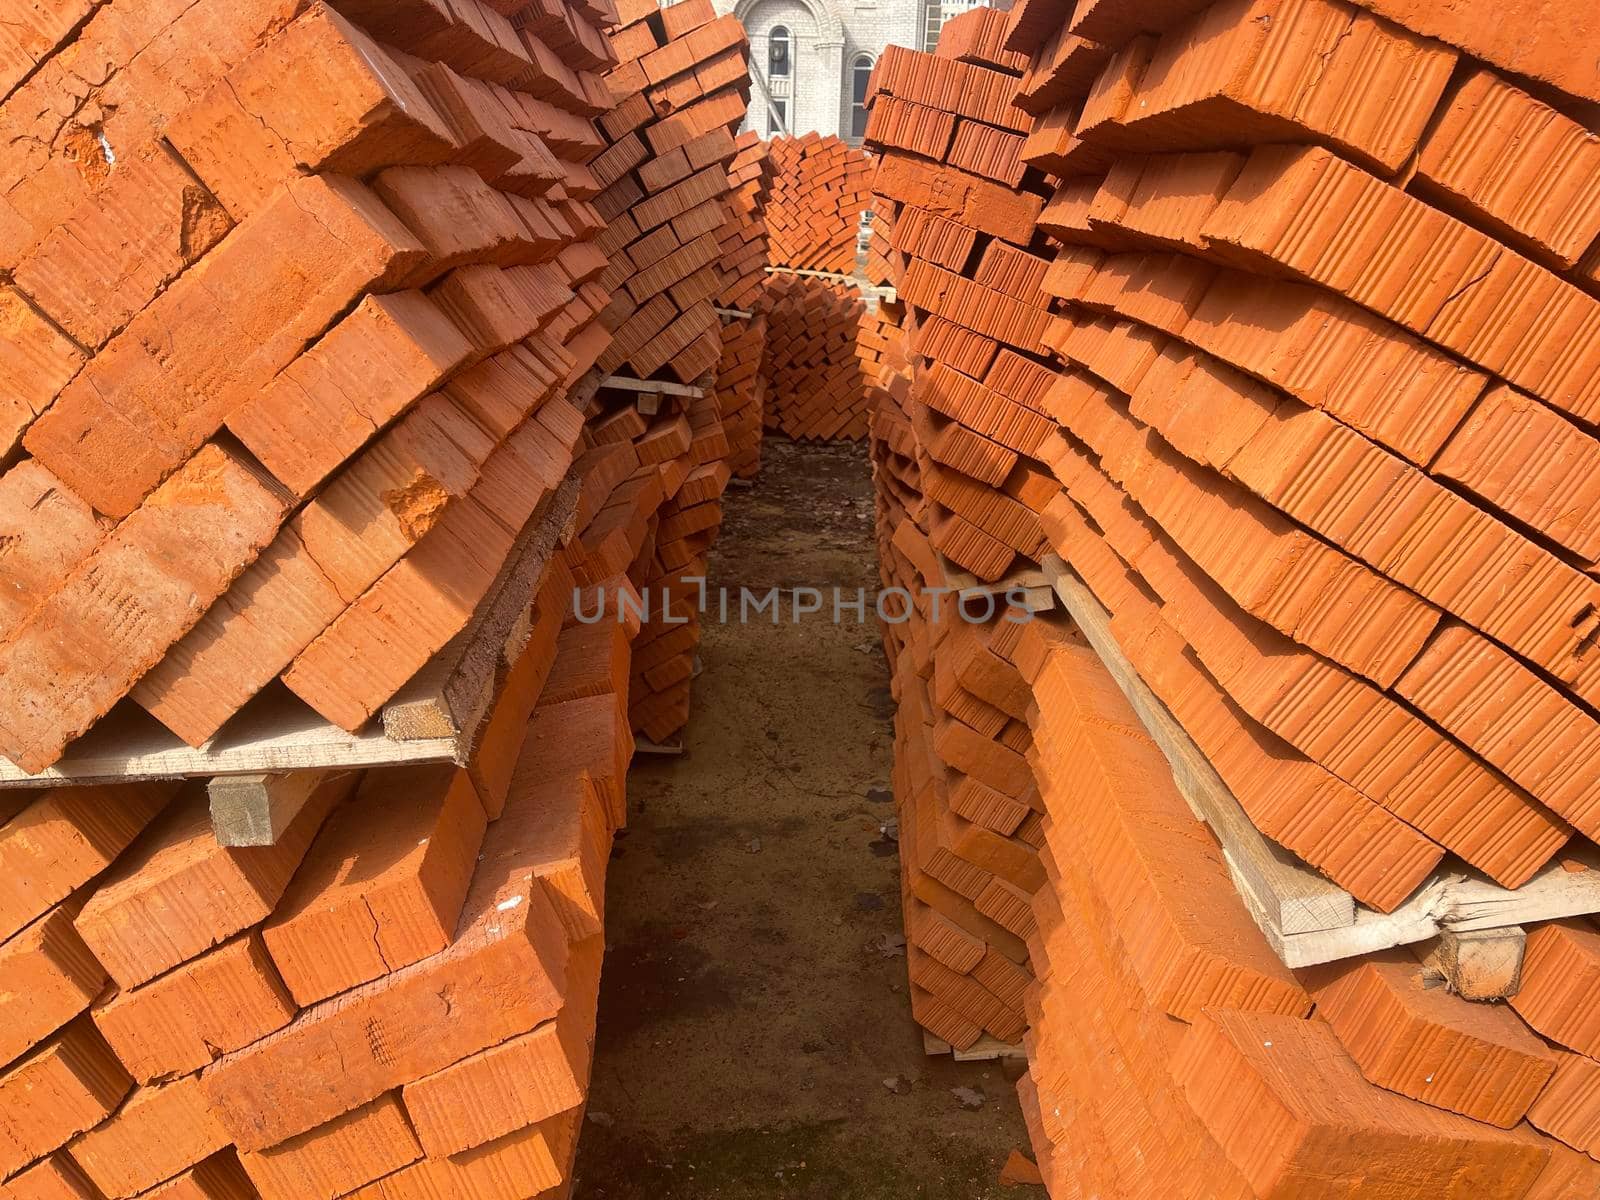 Pile of pallets with red bricks on city street. Building materials on construction site outdoor. Concept of constructing buildings. by epidemiks